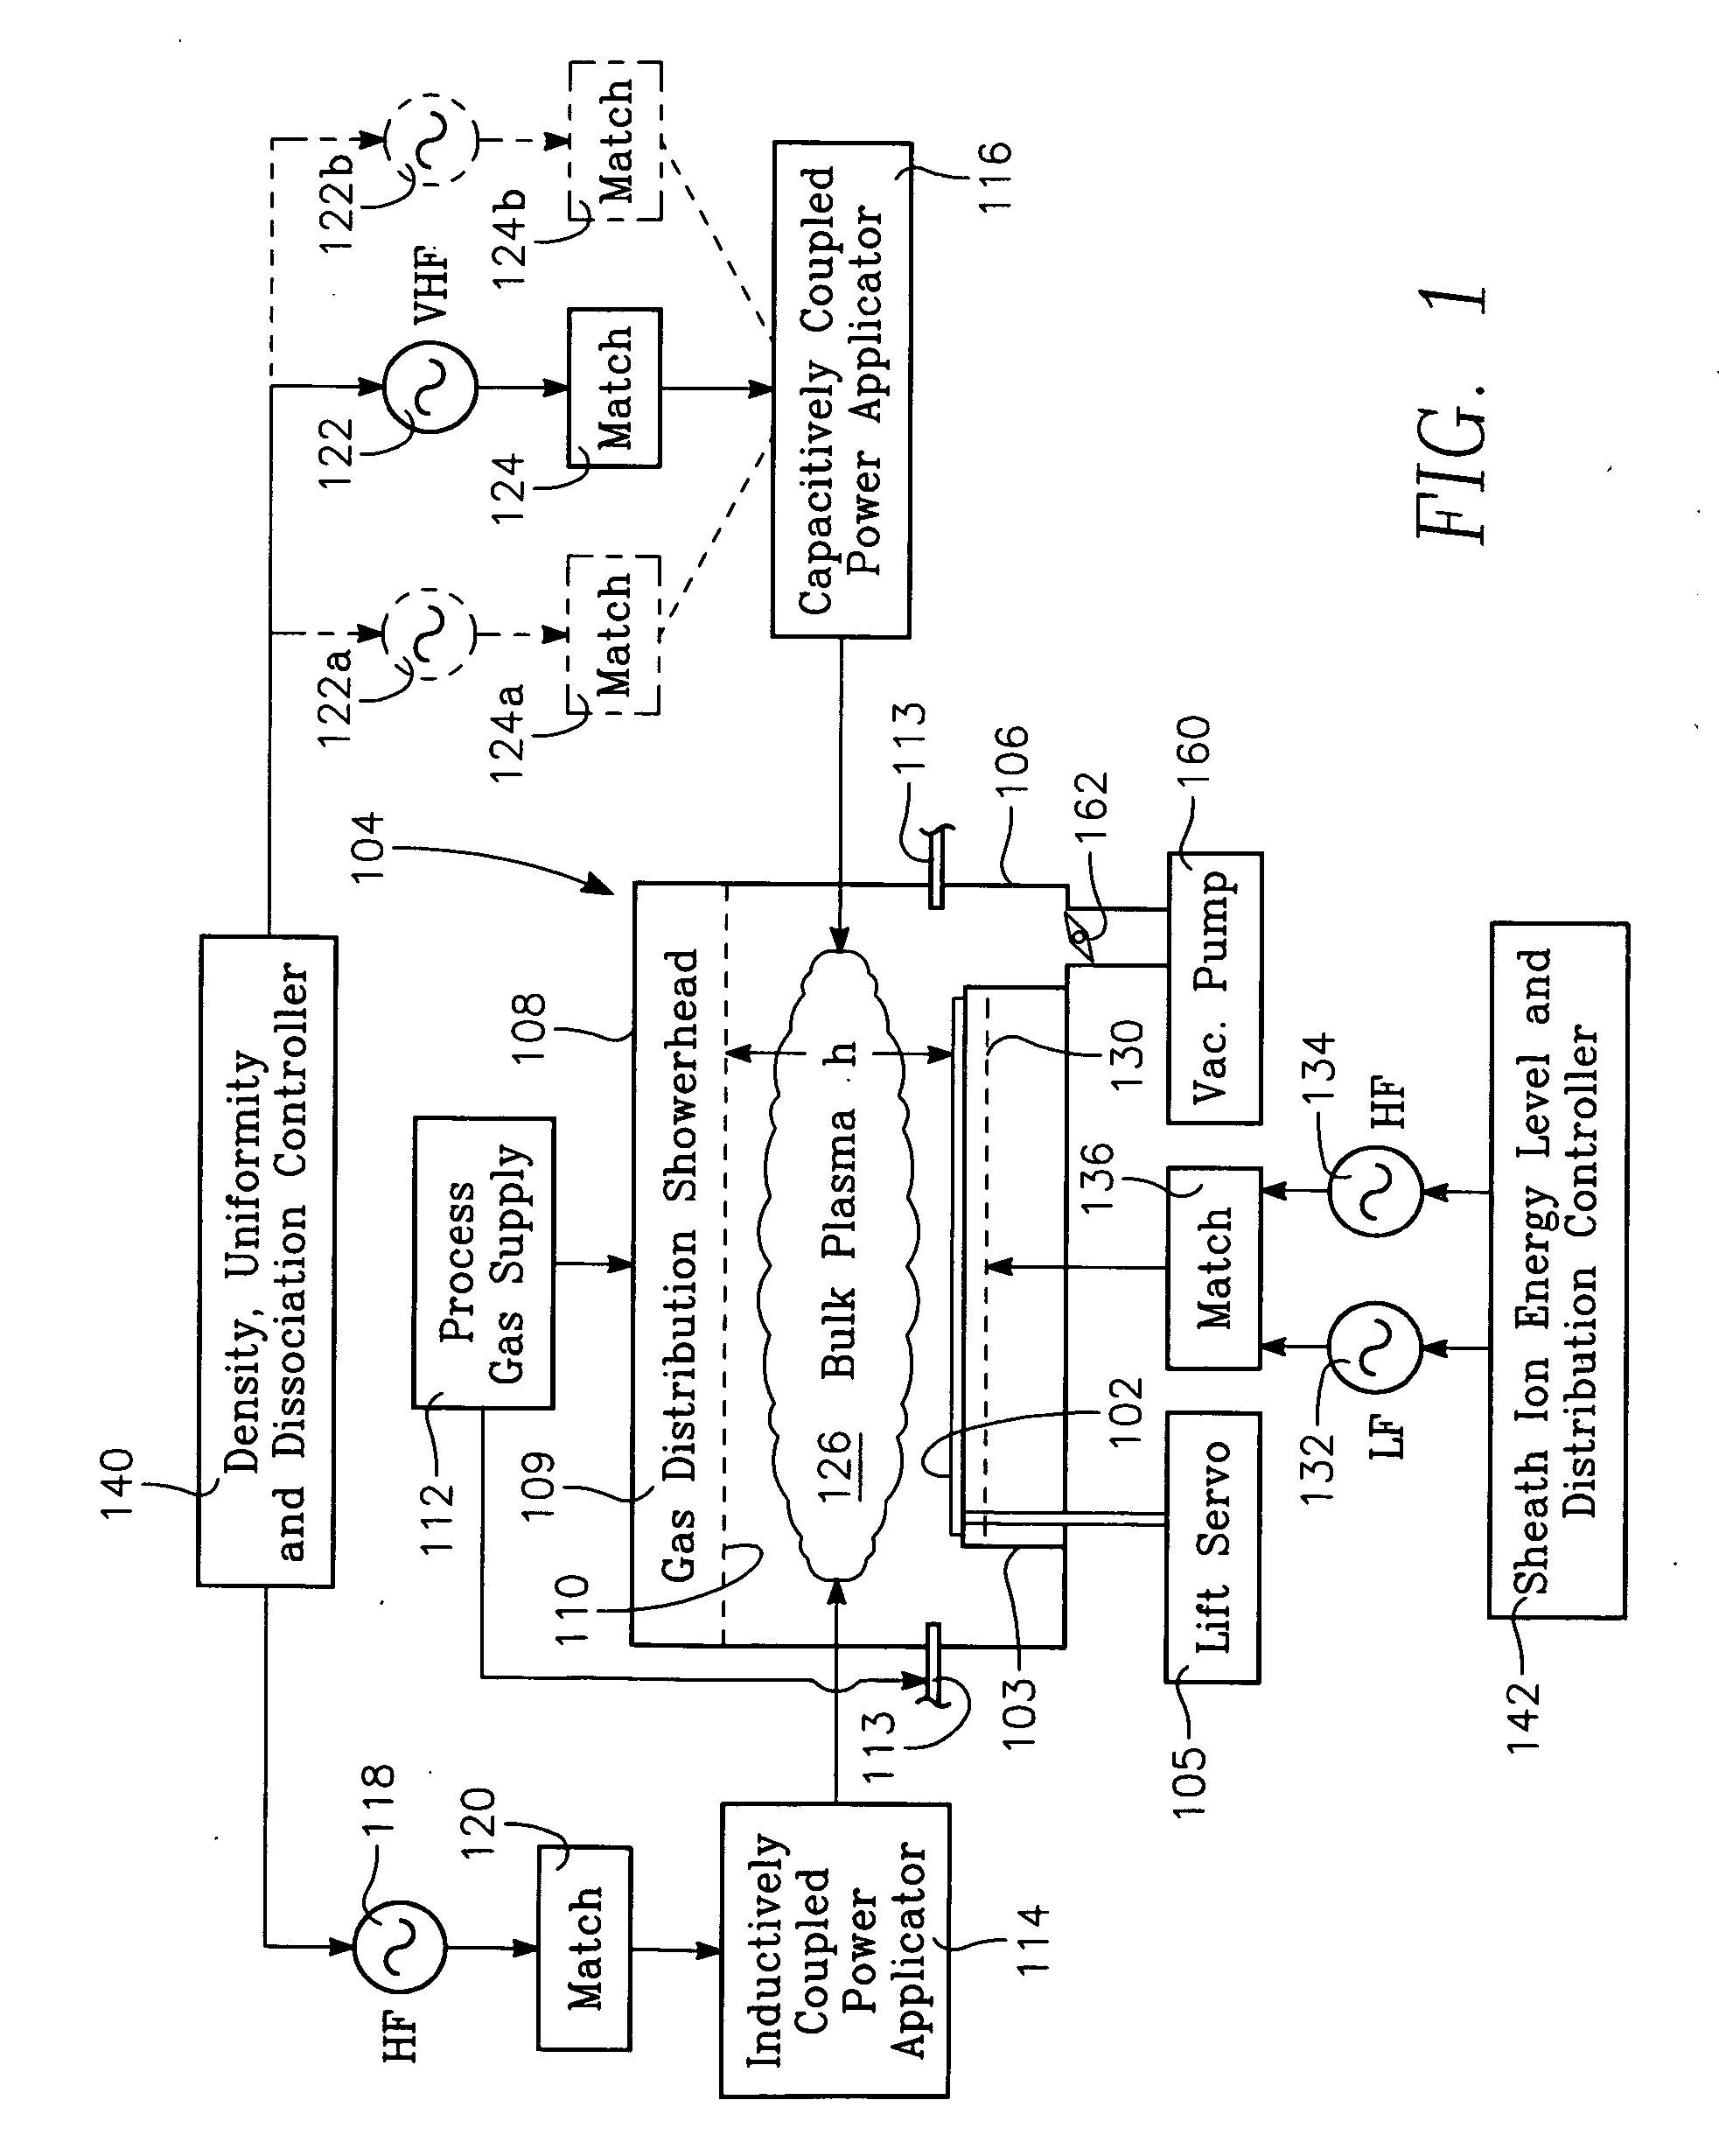 Plasma reactor apparatus with a VHF capacitively coupled plasma source of variable frequency